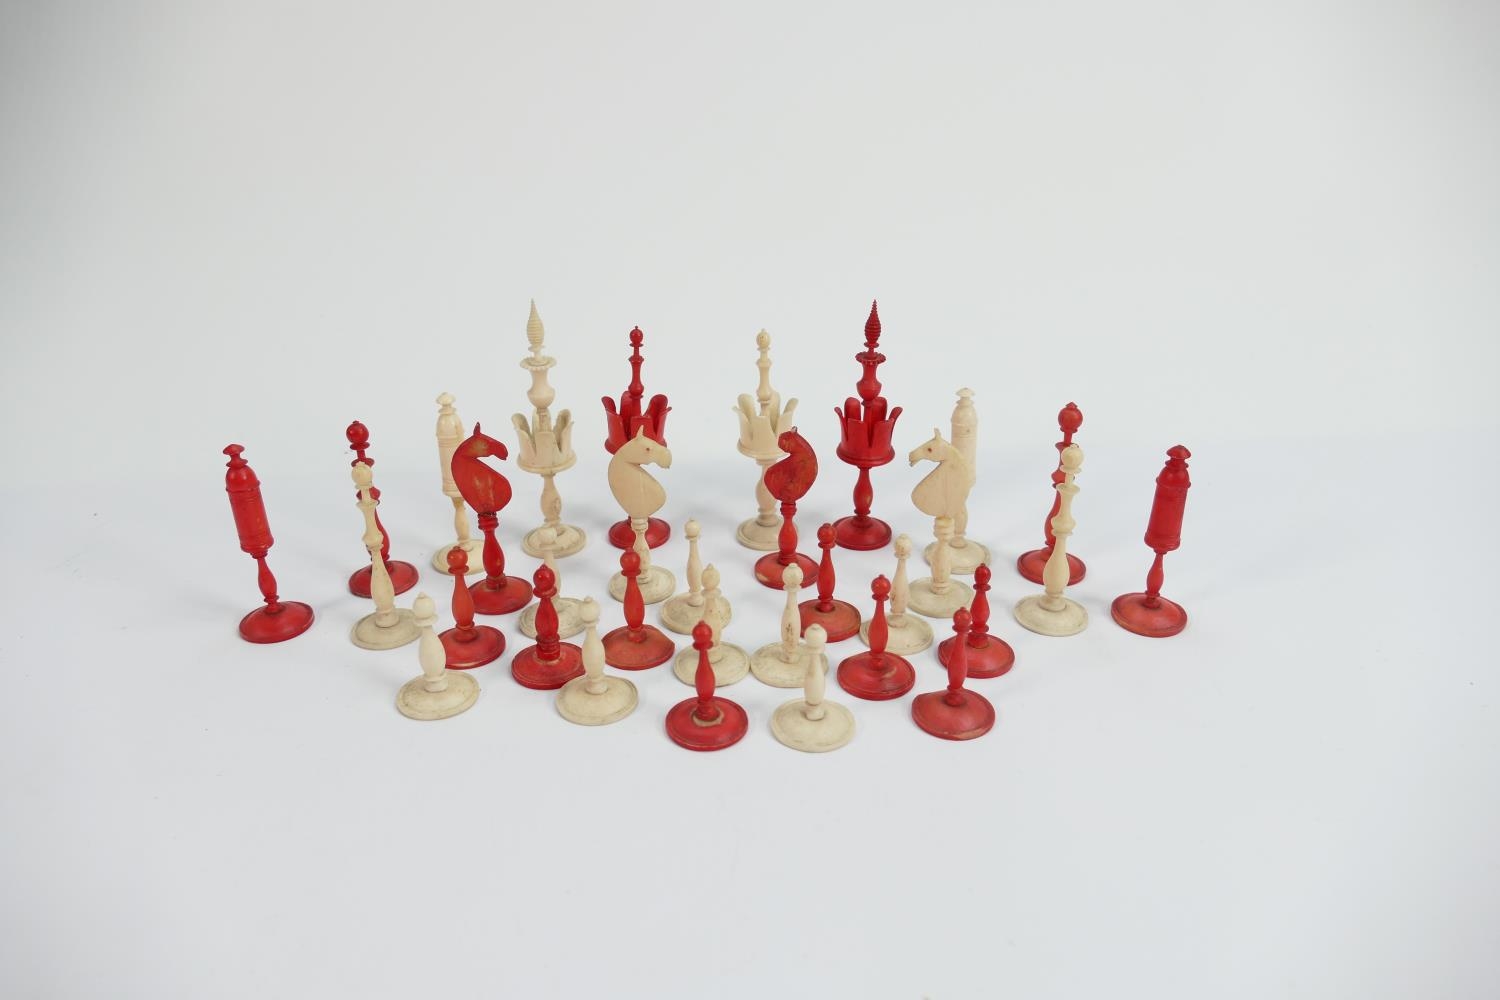 19th Century Finely Carved & Turned Bone Chess Set: damage noted to red knight & white rook, - Image 5 of 5